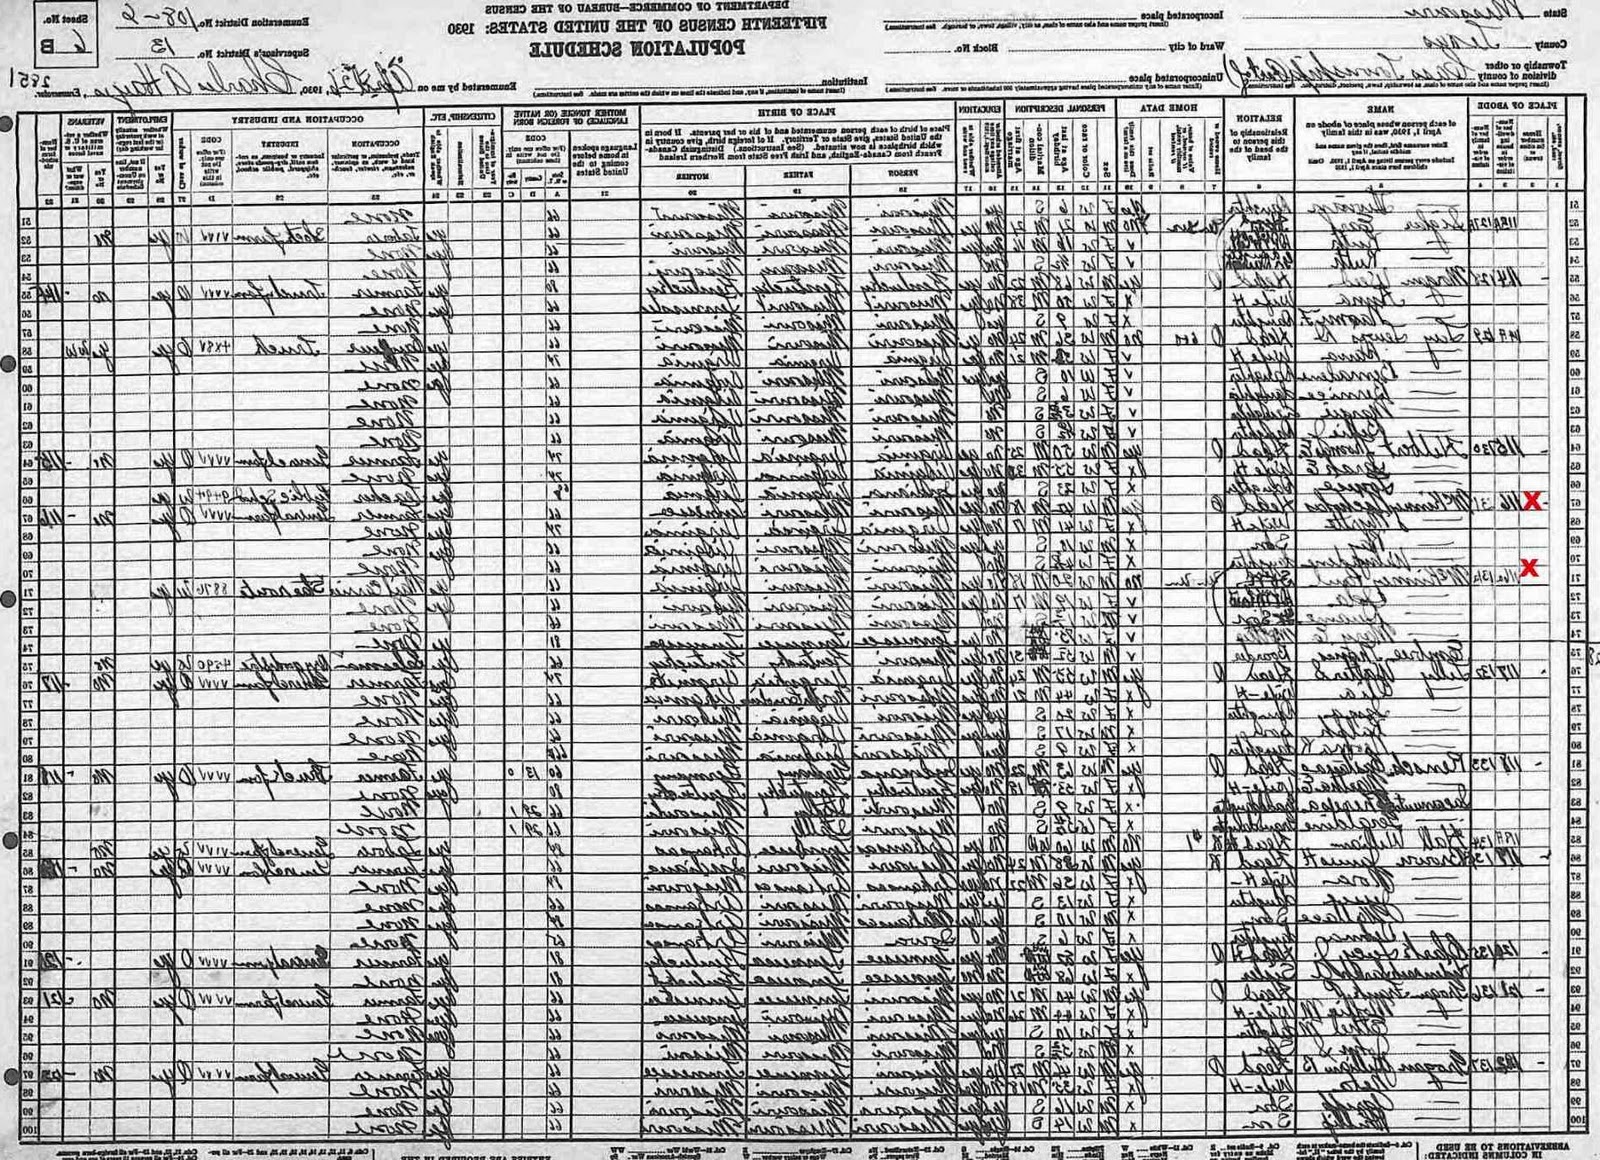 Notes for MARY STIGALL: Listed in 1930 census with grandson Paul McKinney